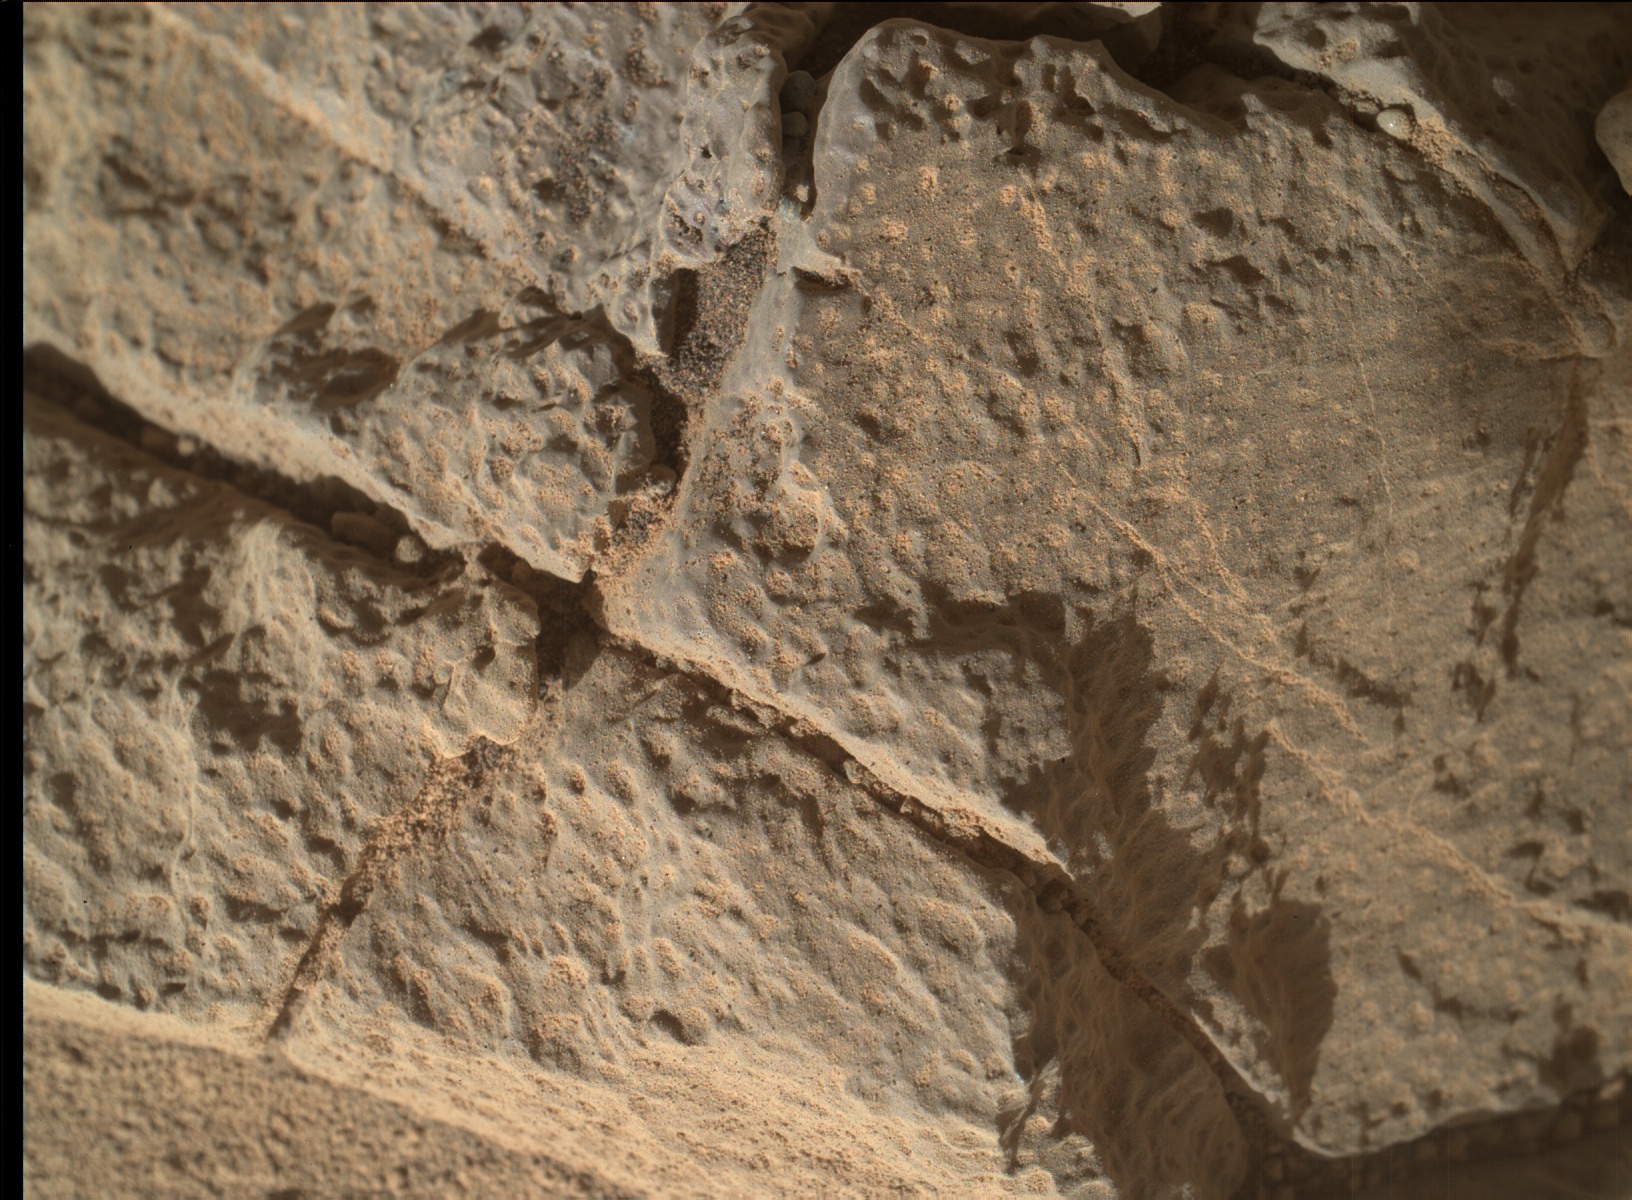 Nasa's Mars rover Curiosity acquired this image using its Mars Hand Lens Imager (MAHLI) on Sol 1375